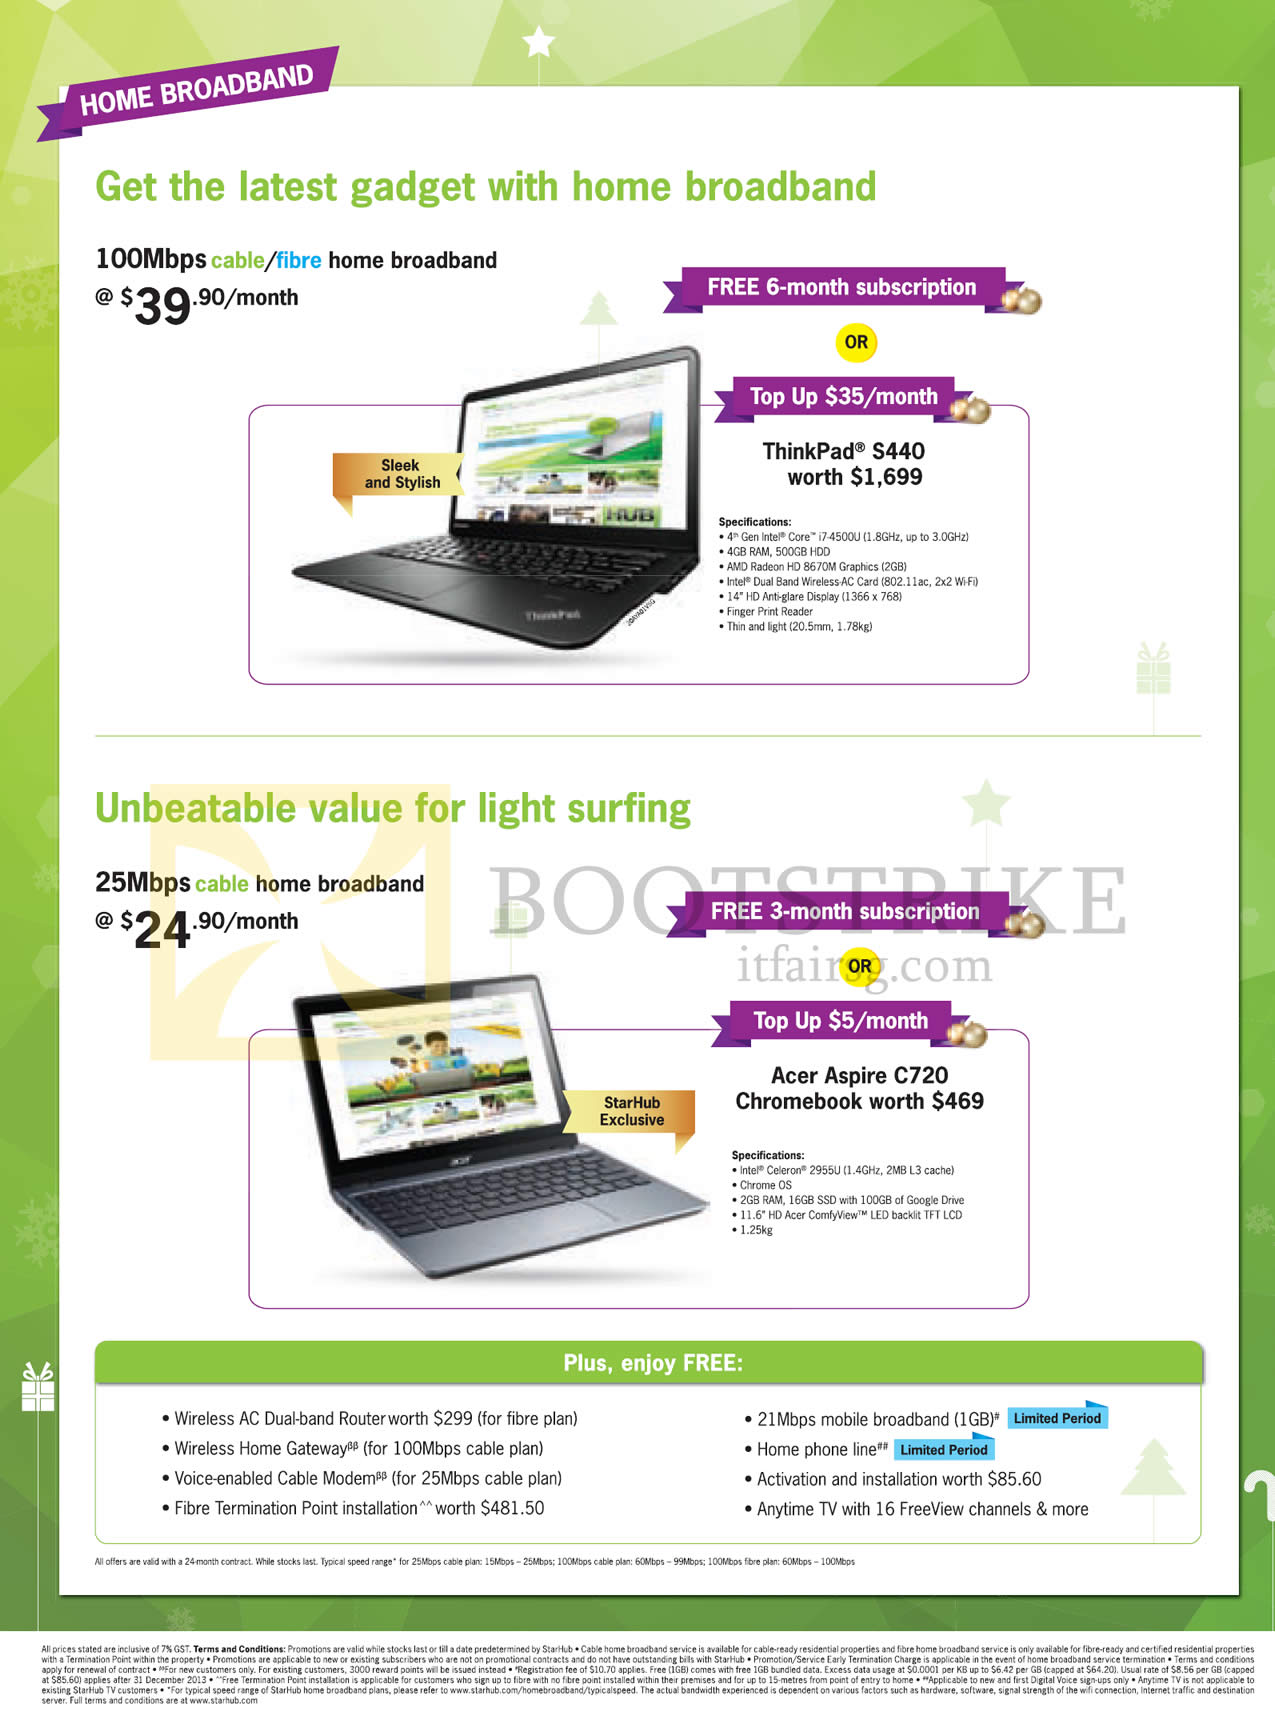 SITEX 2013 price list image brochure of Starhub Fibre Broadband 100Mbps 39.90 Free 6 Months Or ThinkPad S440 Notebook, 25Mbps 24.90 Free 3 Month Or Acer Aspire C720 Chromebook